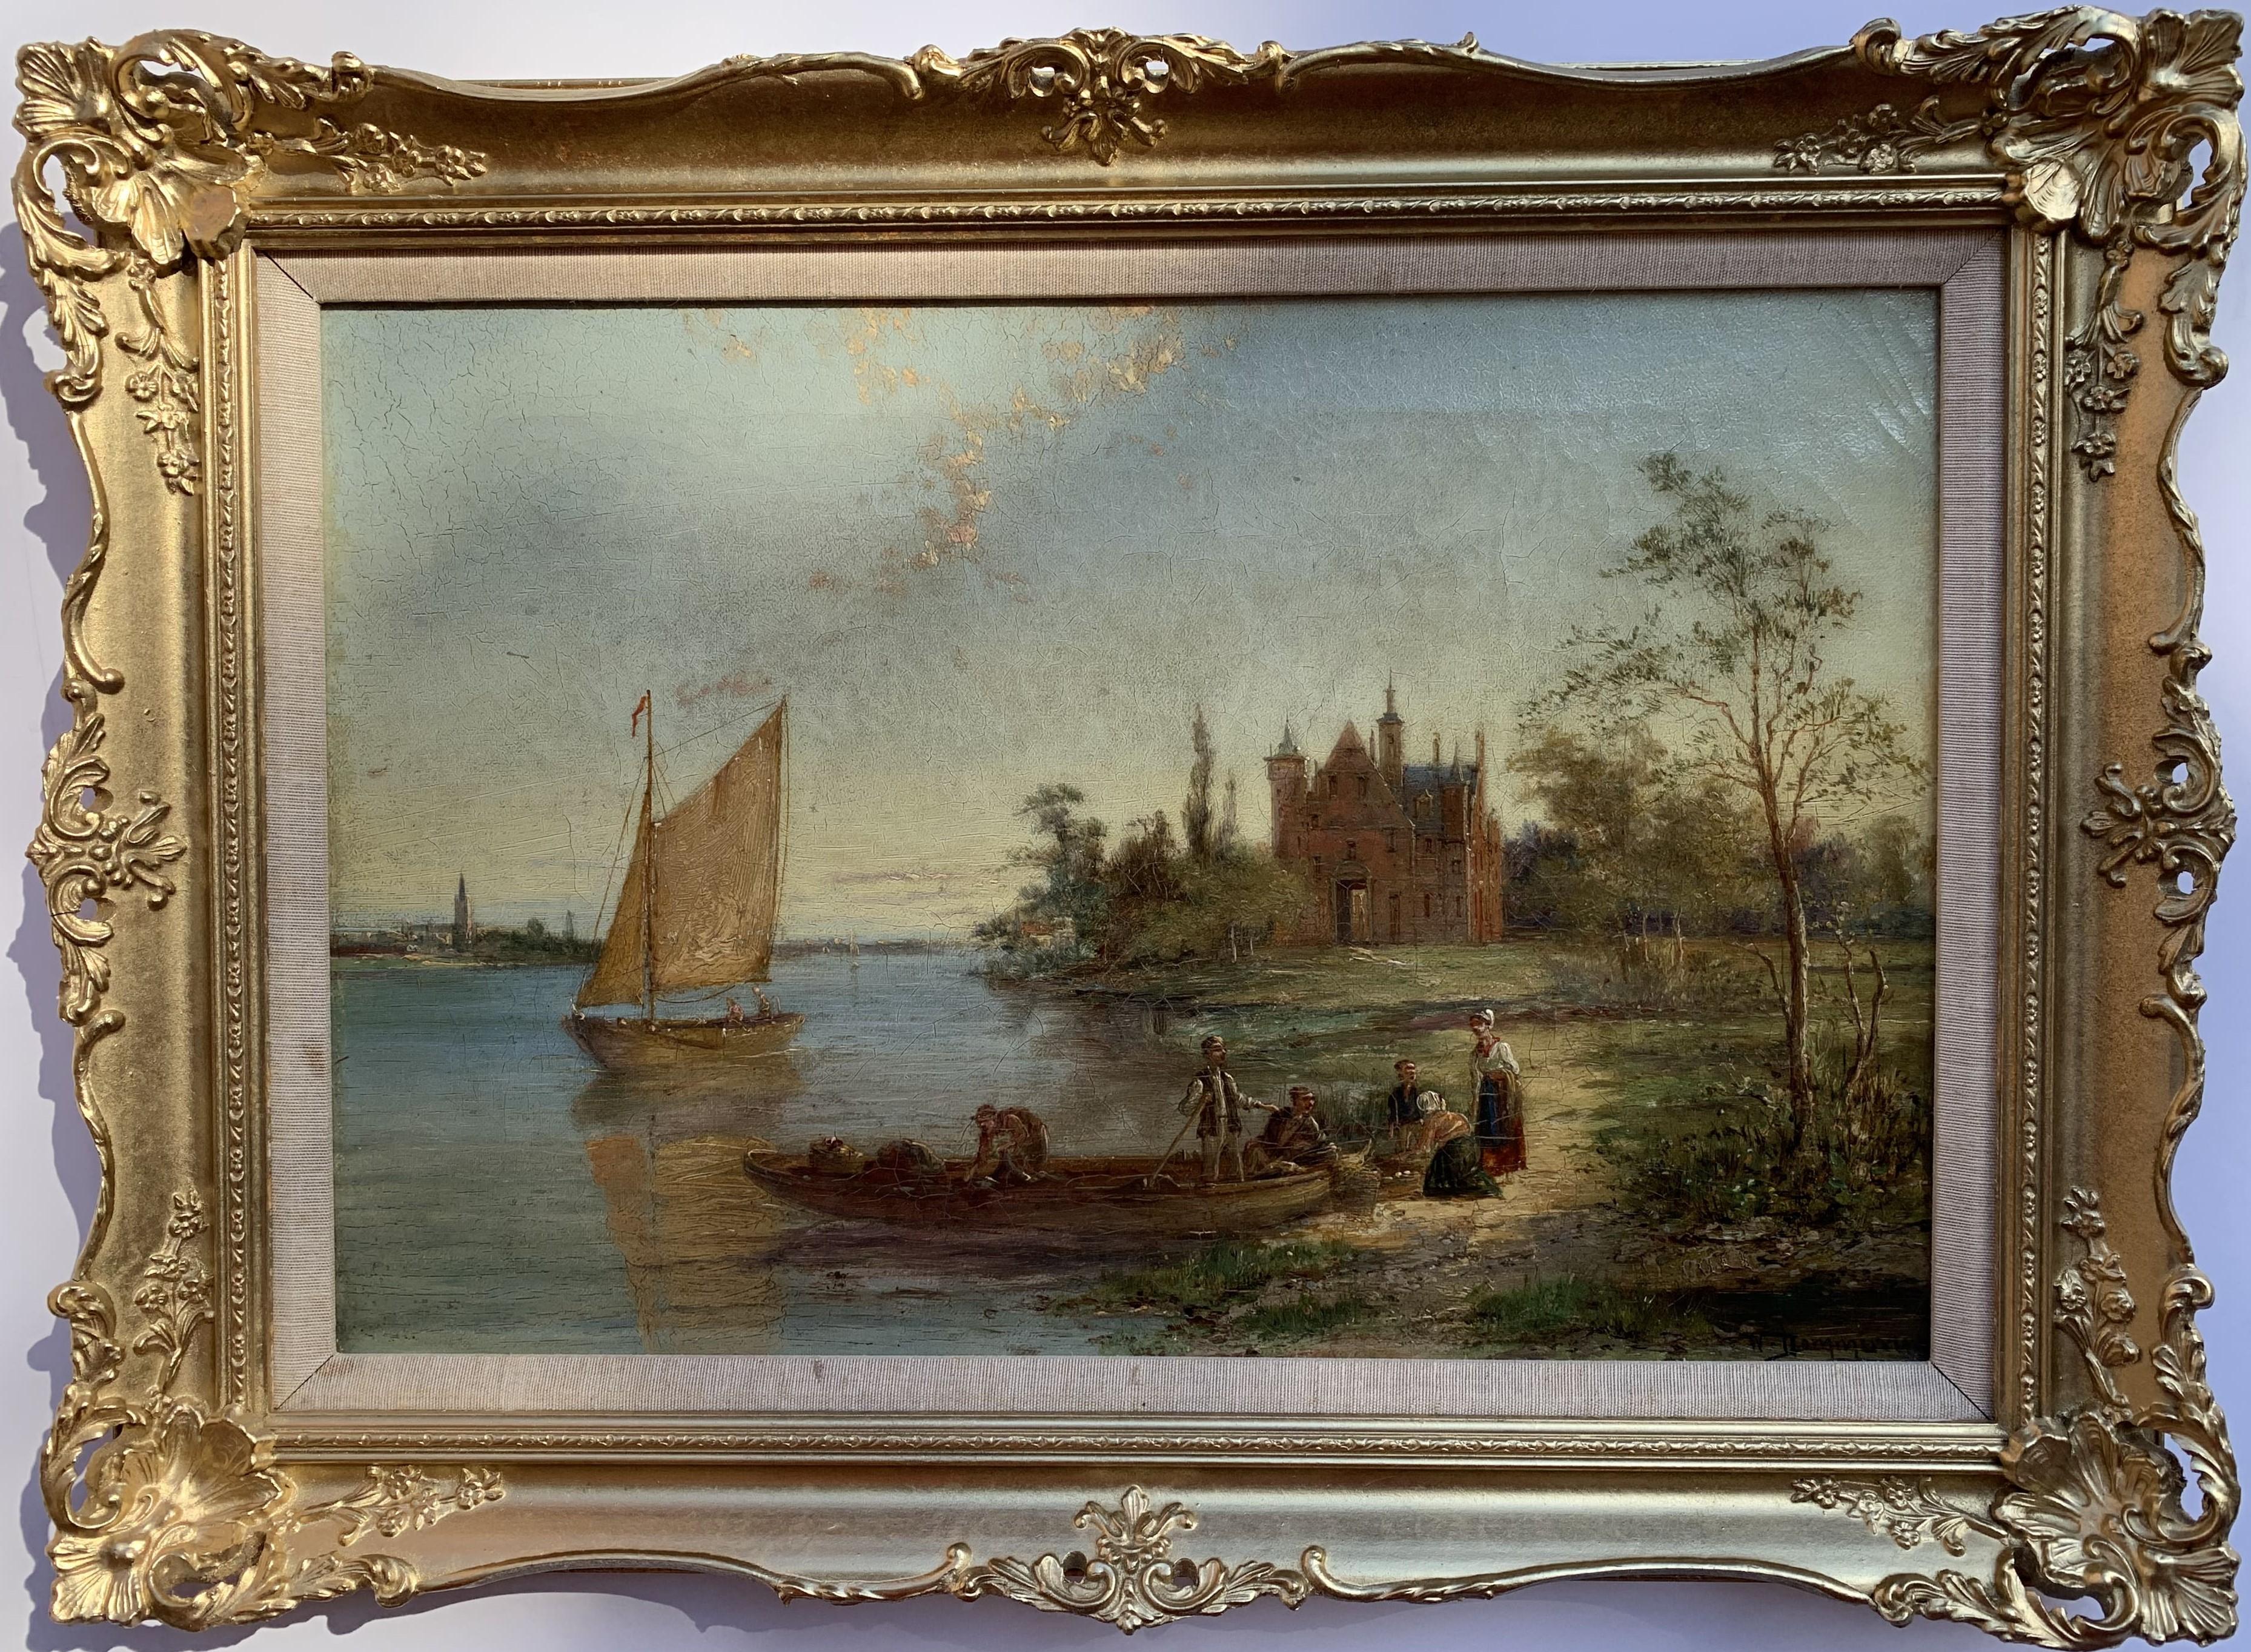 Up for sale is a fantastic antique original oil painting on canvas depicting a seascape -  Coastal Landscape with Sailboats and fishermen. 

Signed in a lower-right corner by Famous Listed British-Dutch Artist William Raymond Dommersen (Dutch,